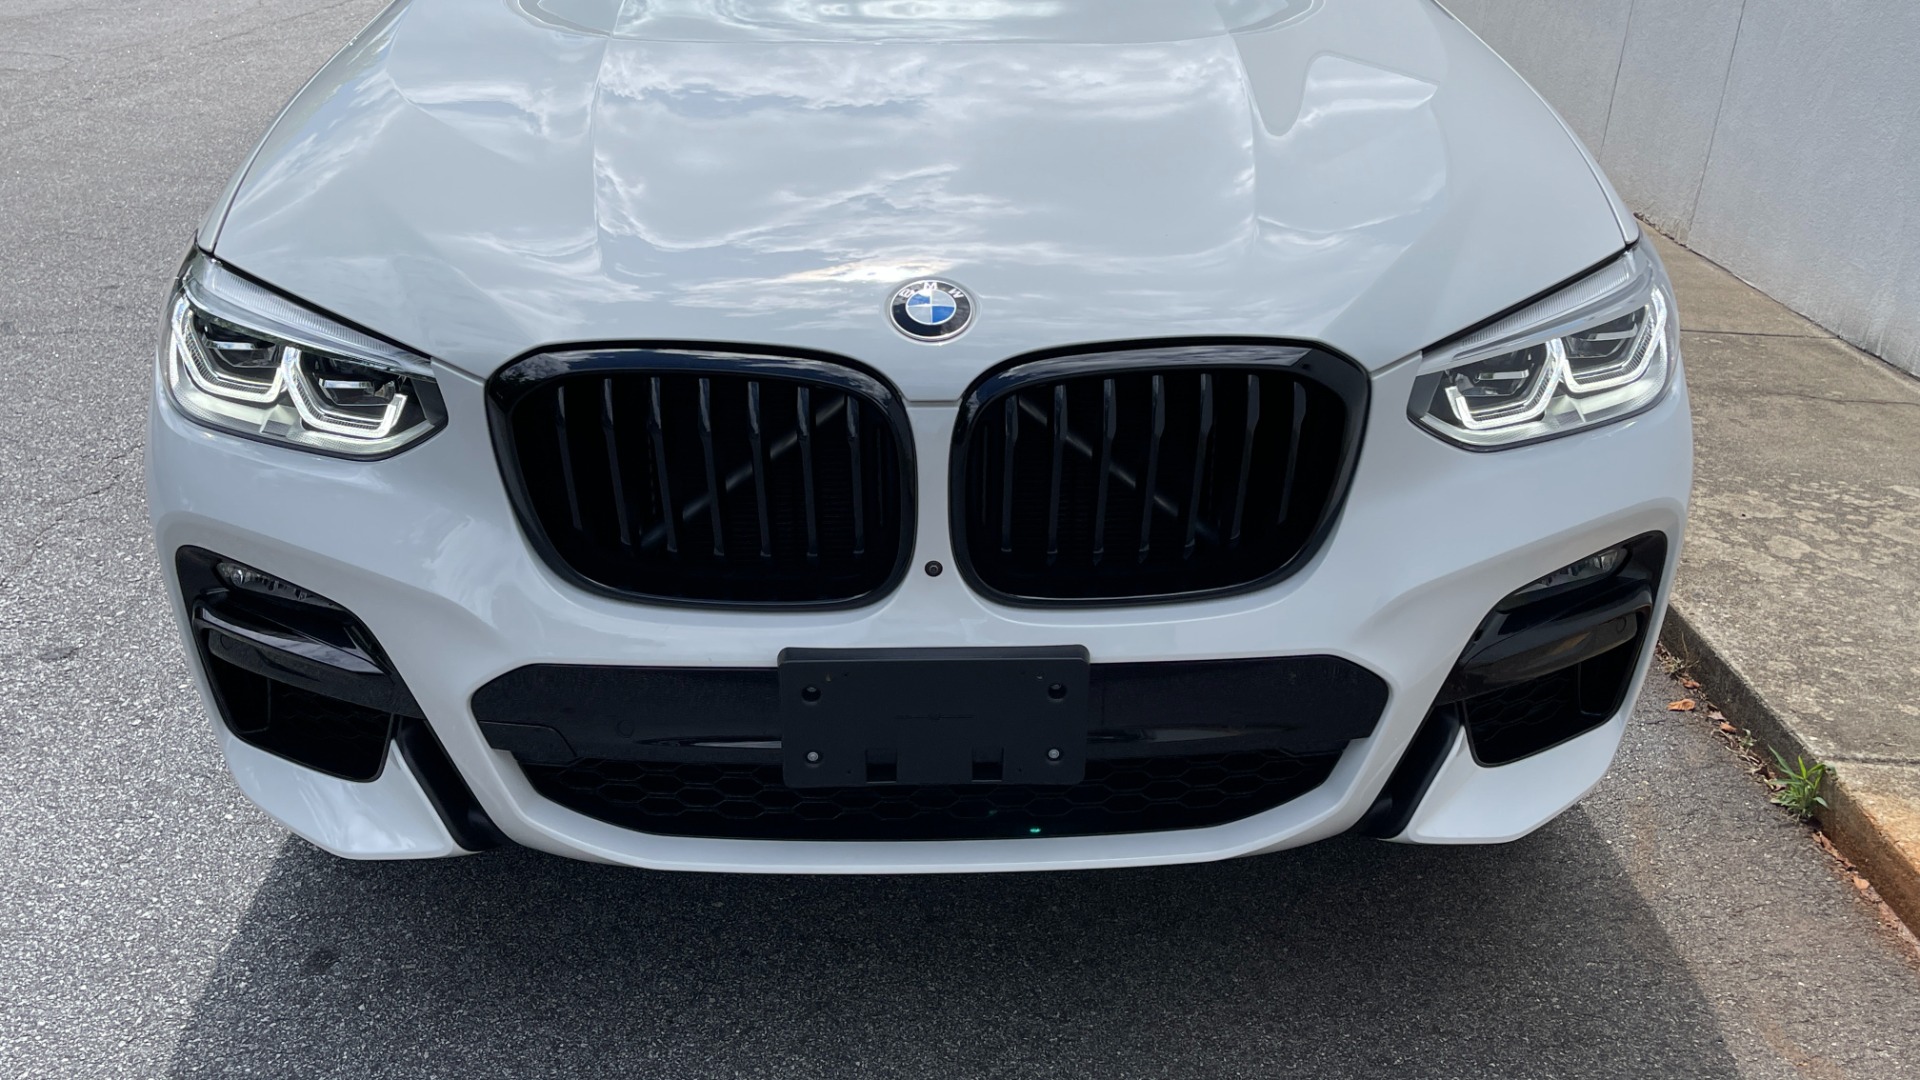 Used 2021 BMW X3 M40i / EXECUTIVE PACKAGE / SHADOWLINE TRIM / HEADS UP DISPLAY / AMBIENT LIG for sale $57,392 at Formula Imports in Charlotte NC 28227 6